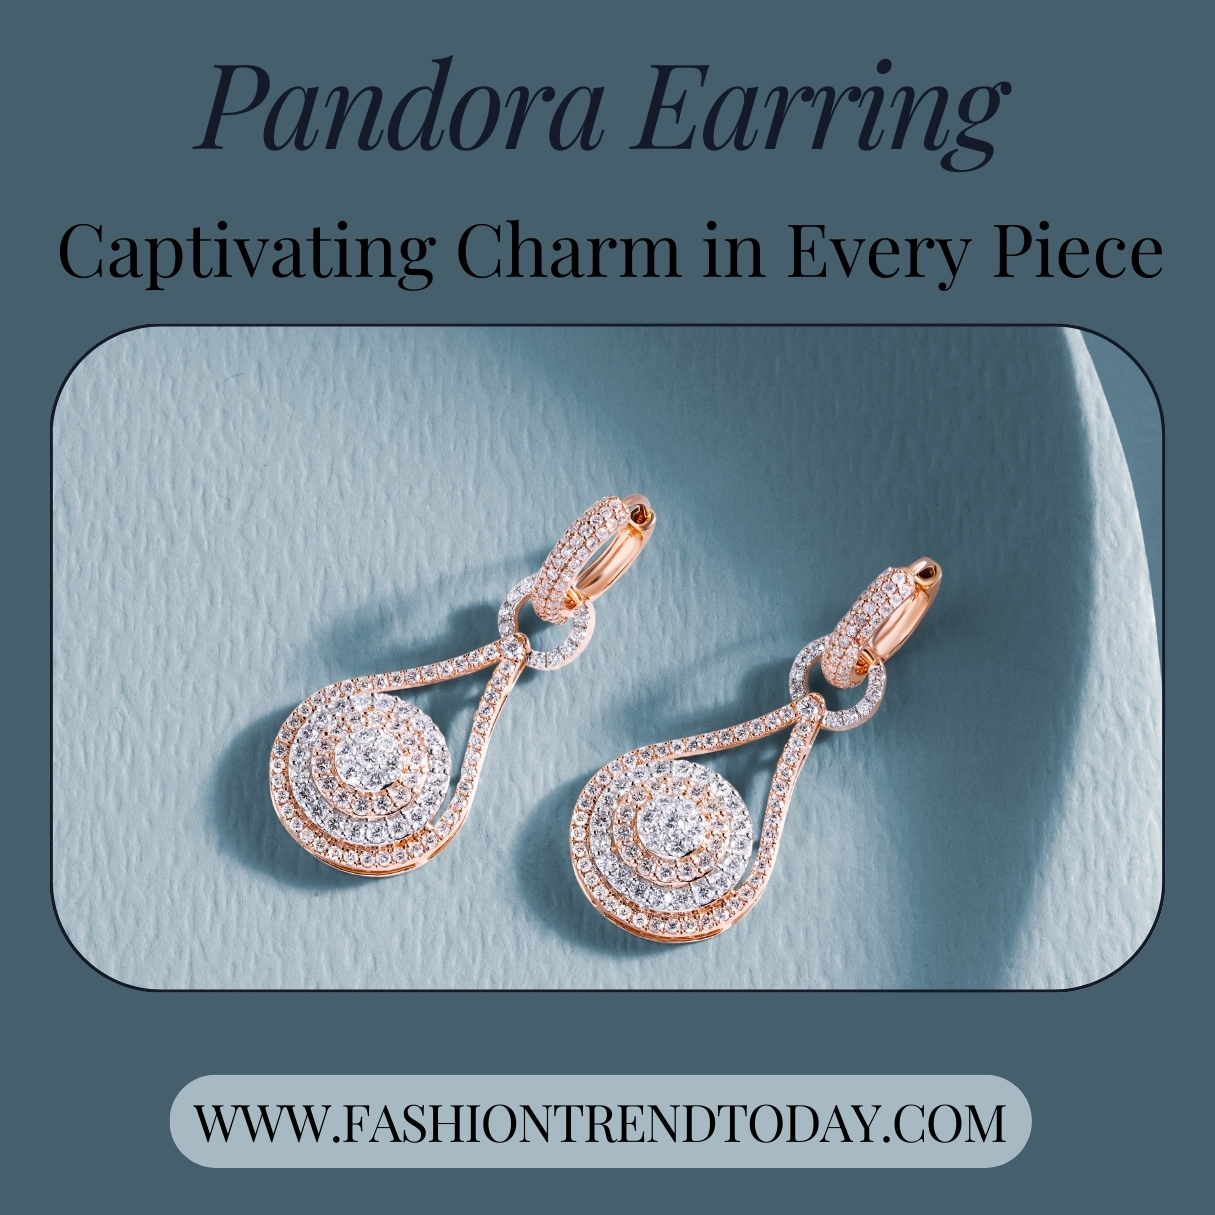 Captivating Charm in Every Piece